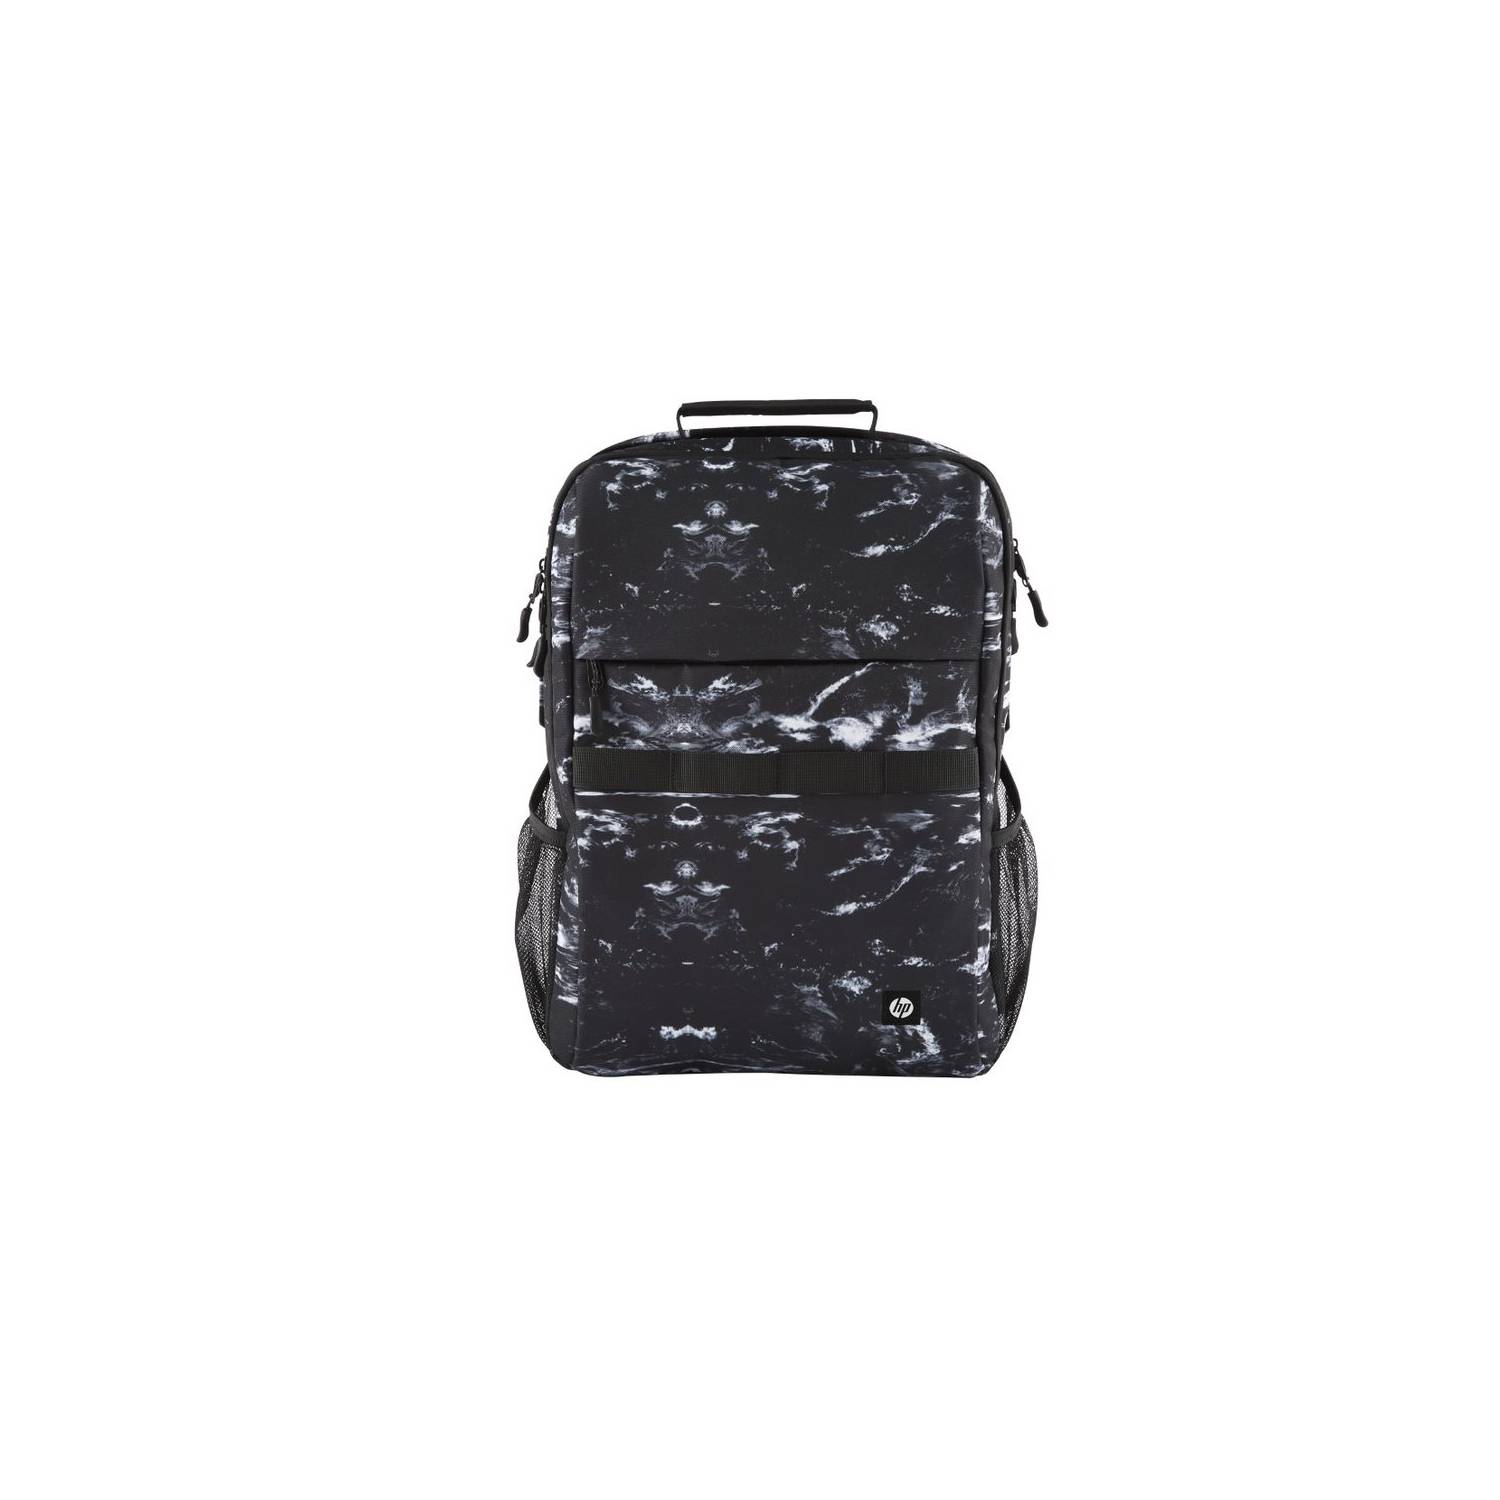 HP Mochila HP Campus XL Marble Stone Backpack